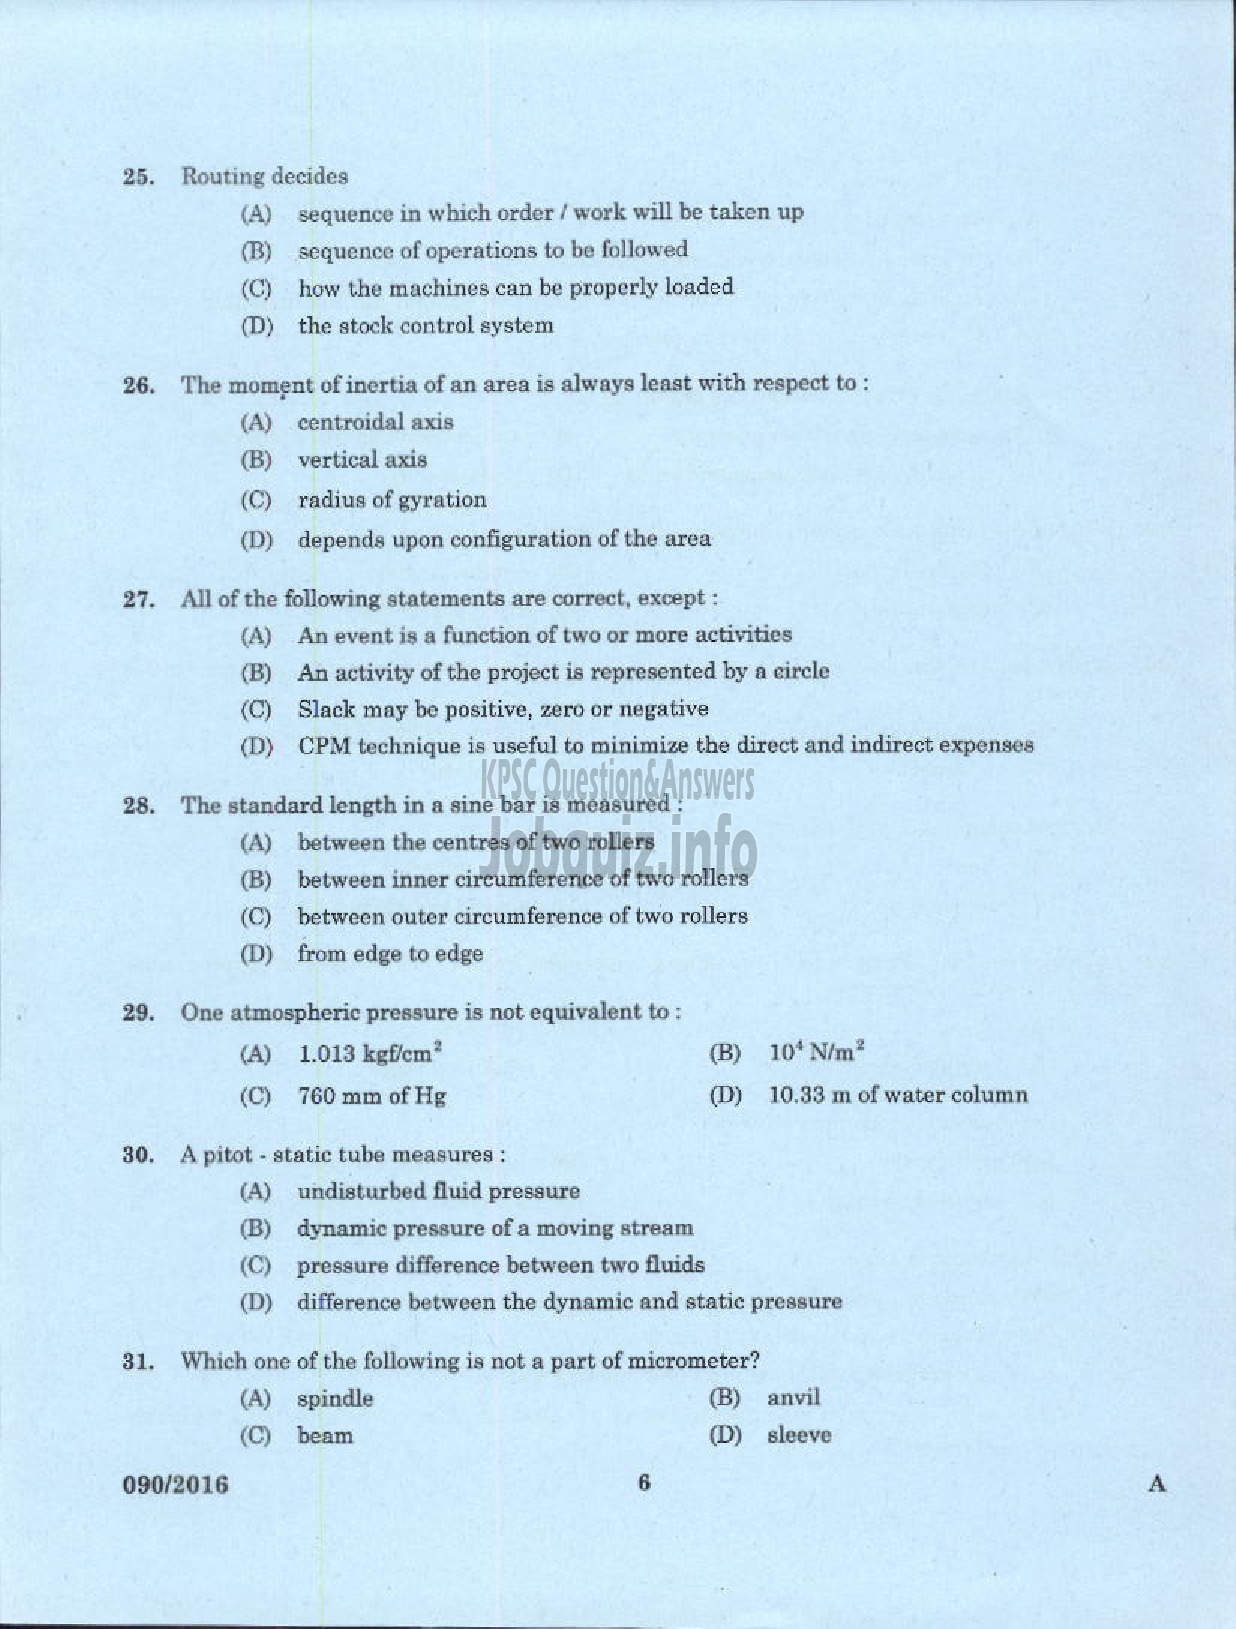 Kerala PSC Question Paper - VOCATIONAL INSTRUCTOR IN REFRIGERATION AND AIR CONDITIONING VHSE-4